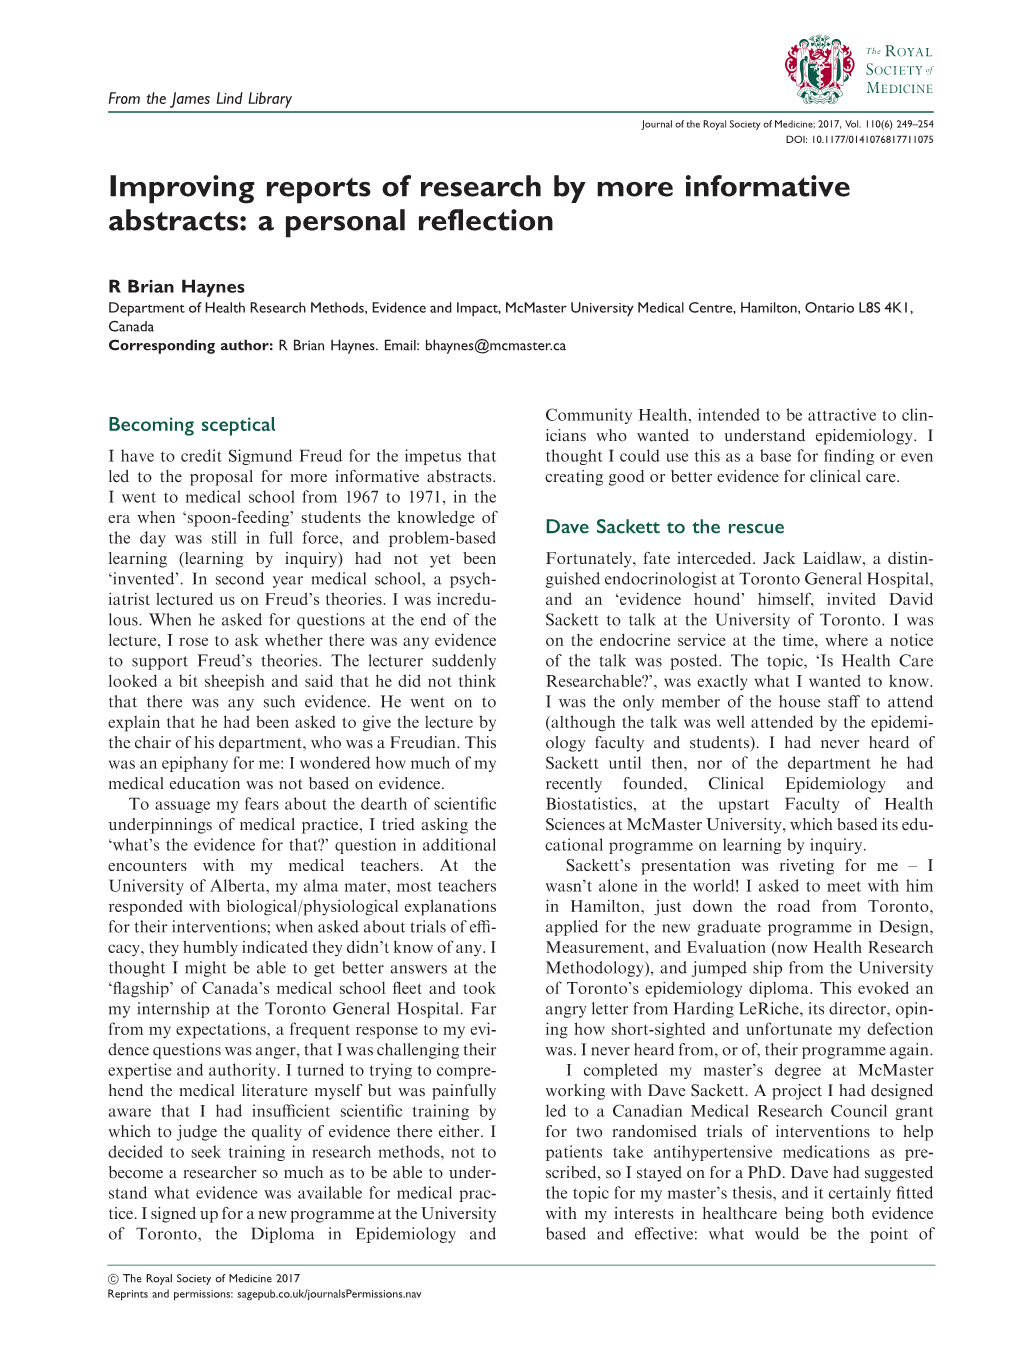 Improving Reports of Research by More Informative Abstracts: a Personal Reflection